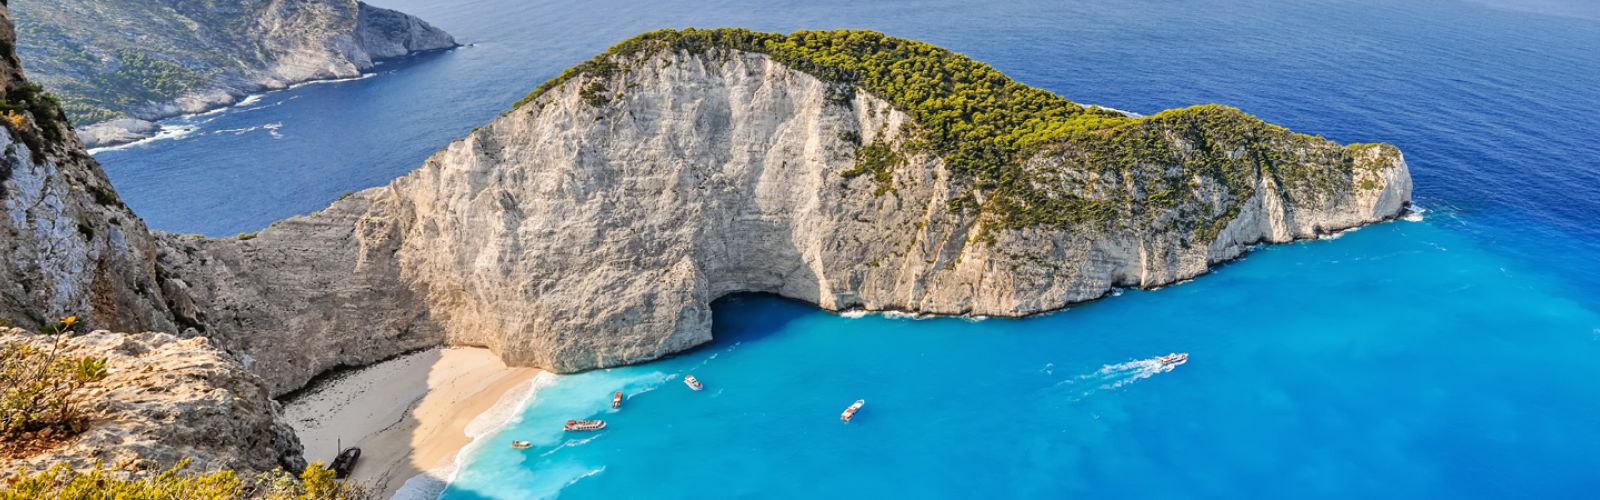 Flights to Zante from London Stansted Airport